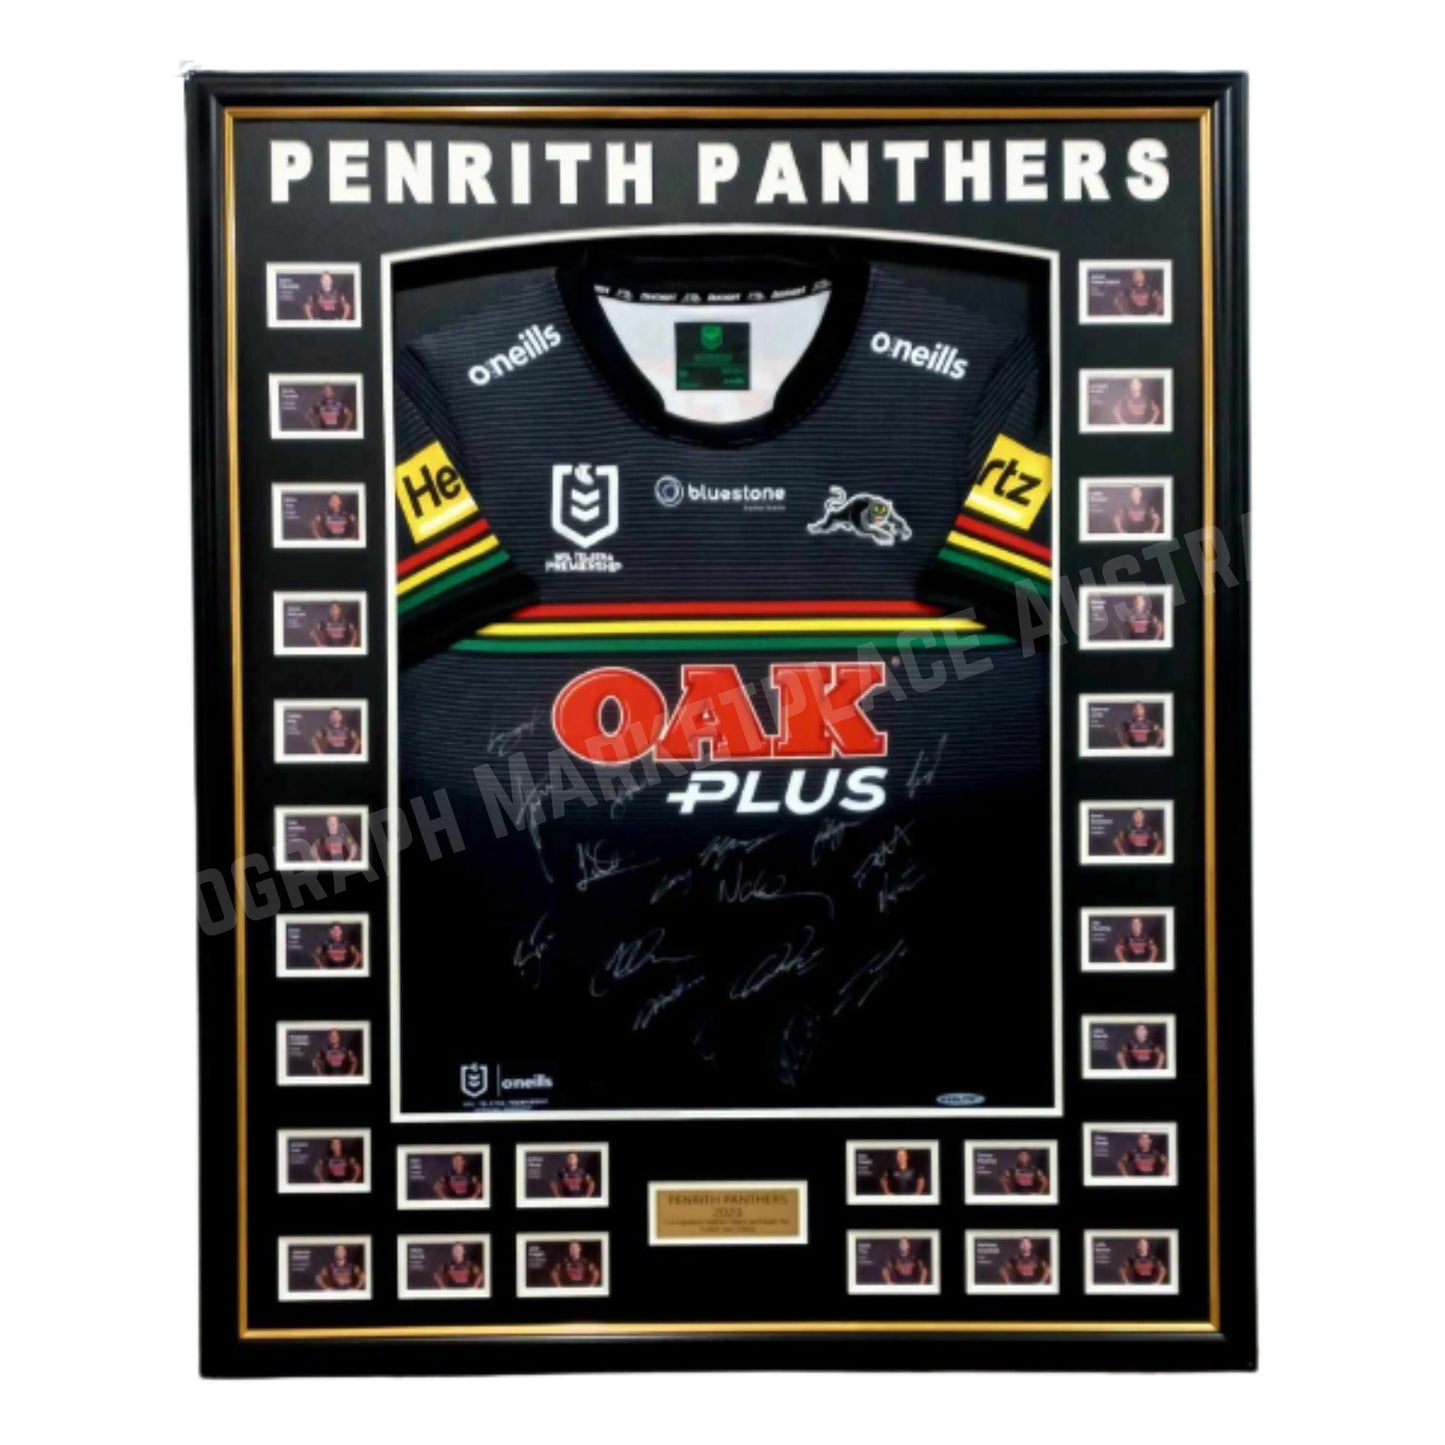 2023 Penrith Panthers NRL Rugby League Framed Signed Jersey, front side view